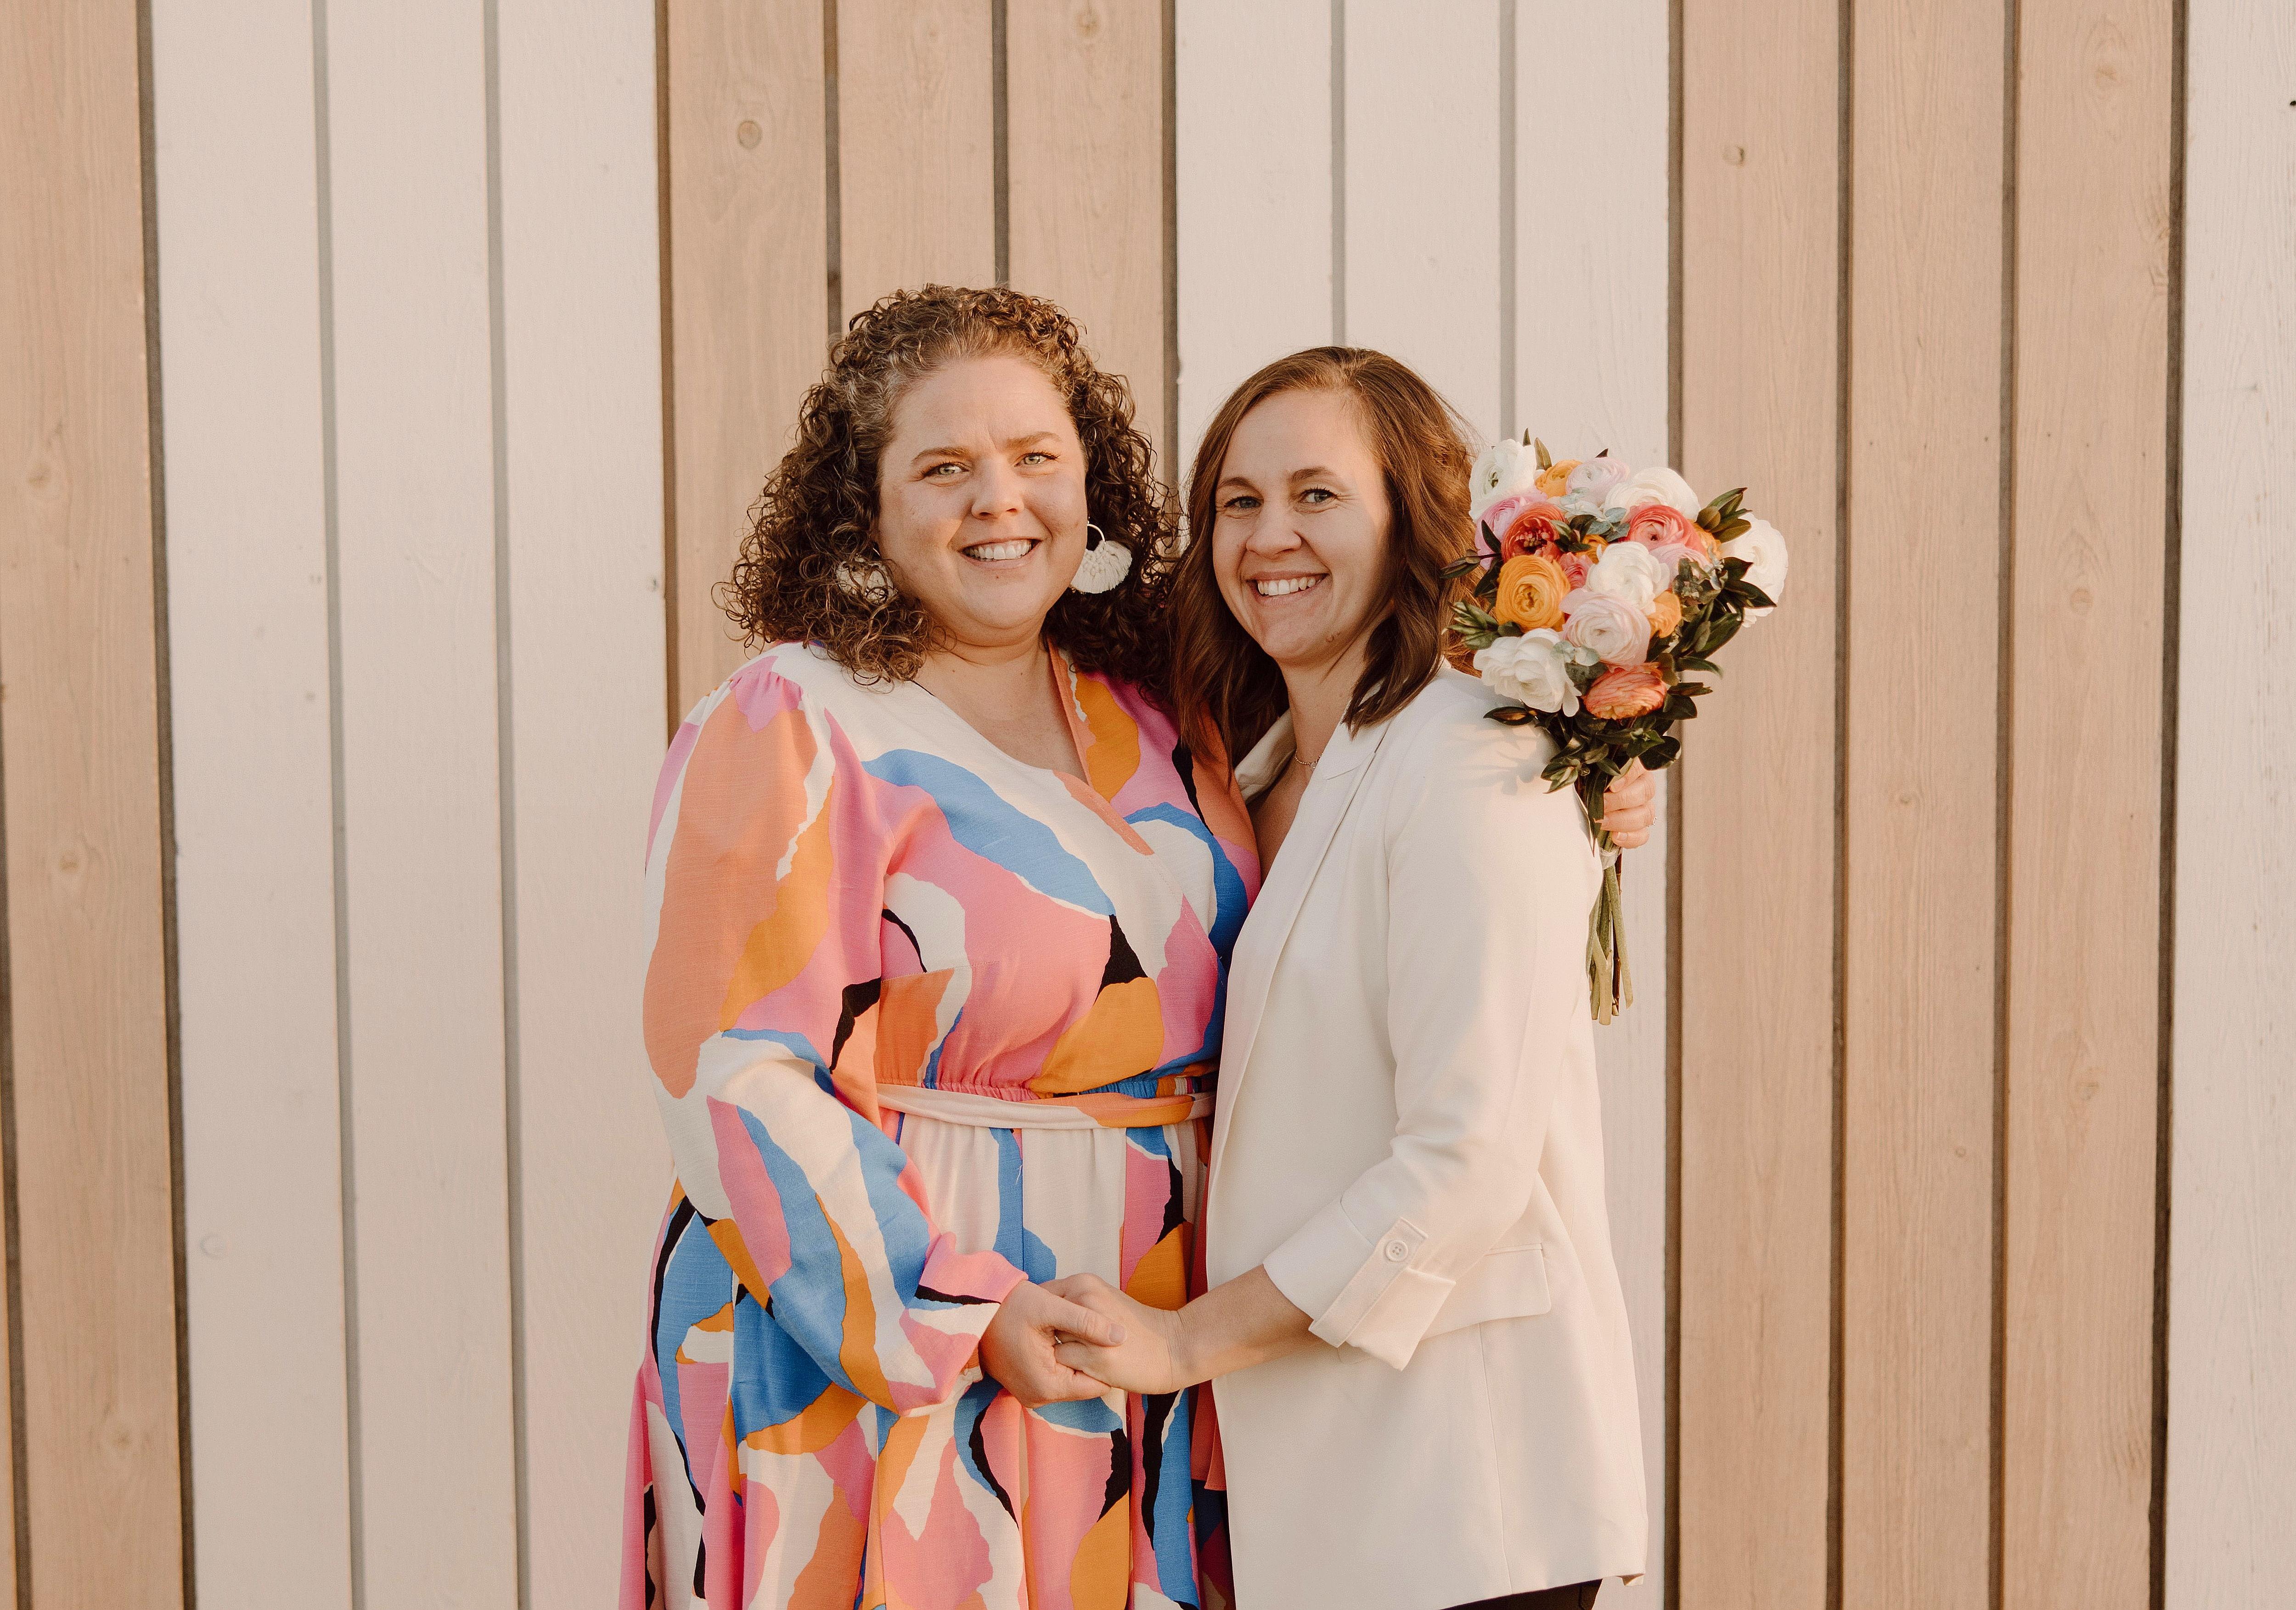 The Wedding Website of Jessica Dayer and Haley Oliver